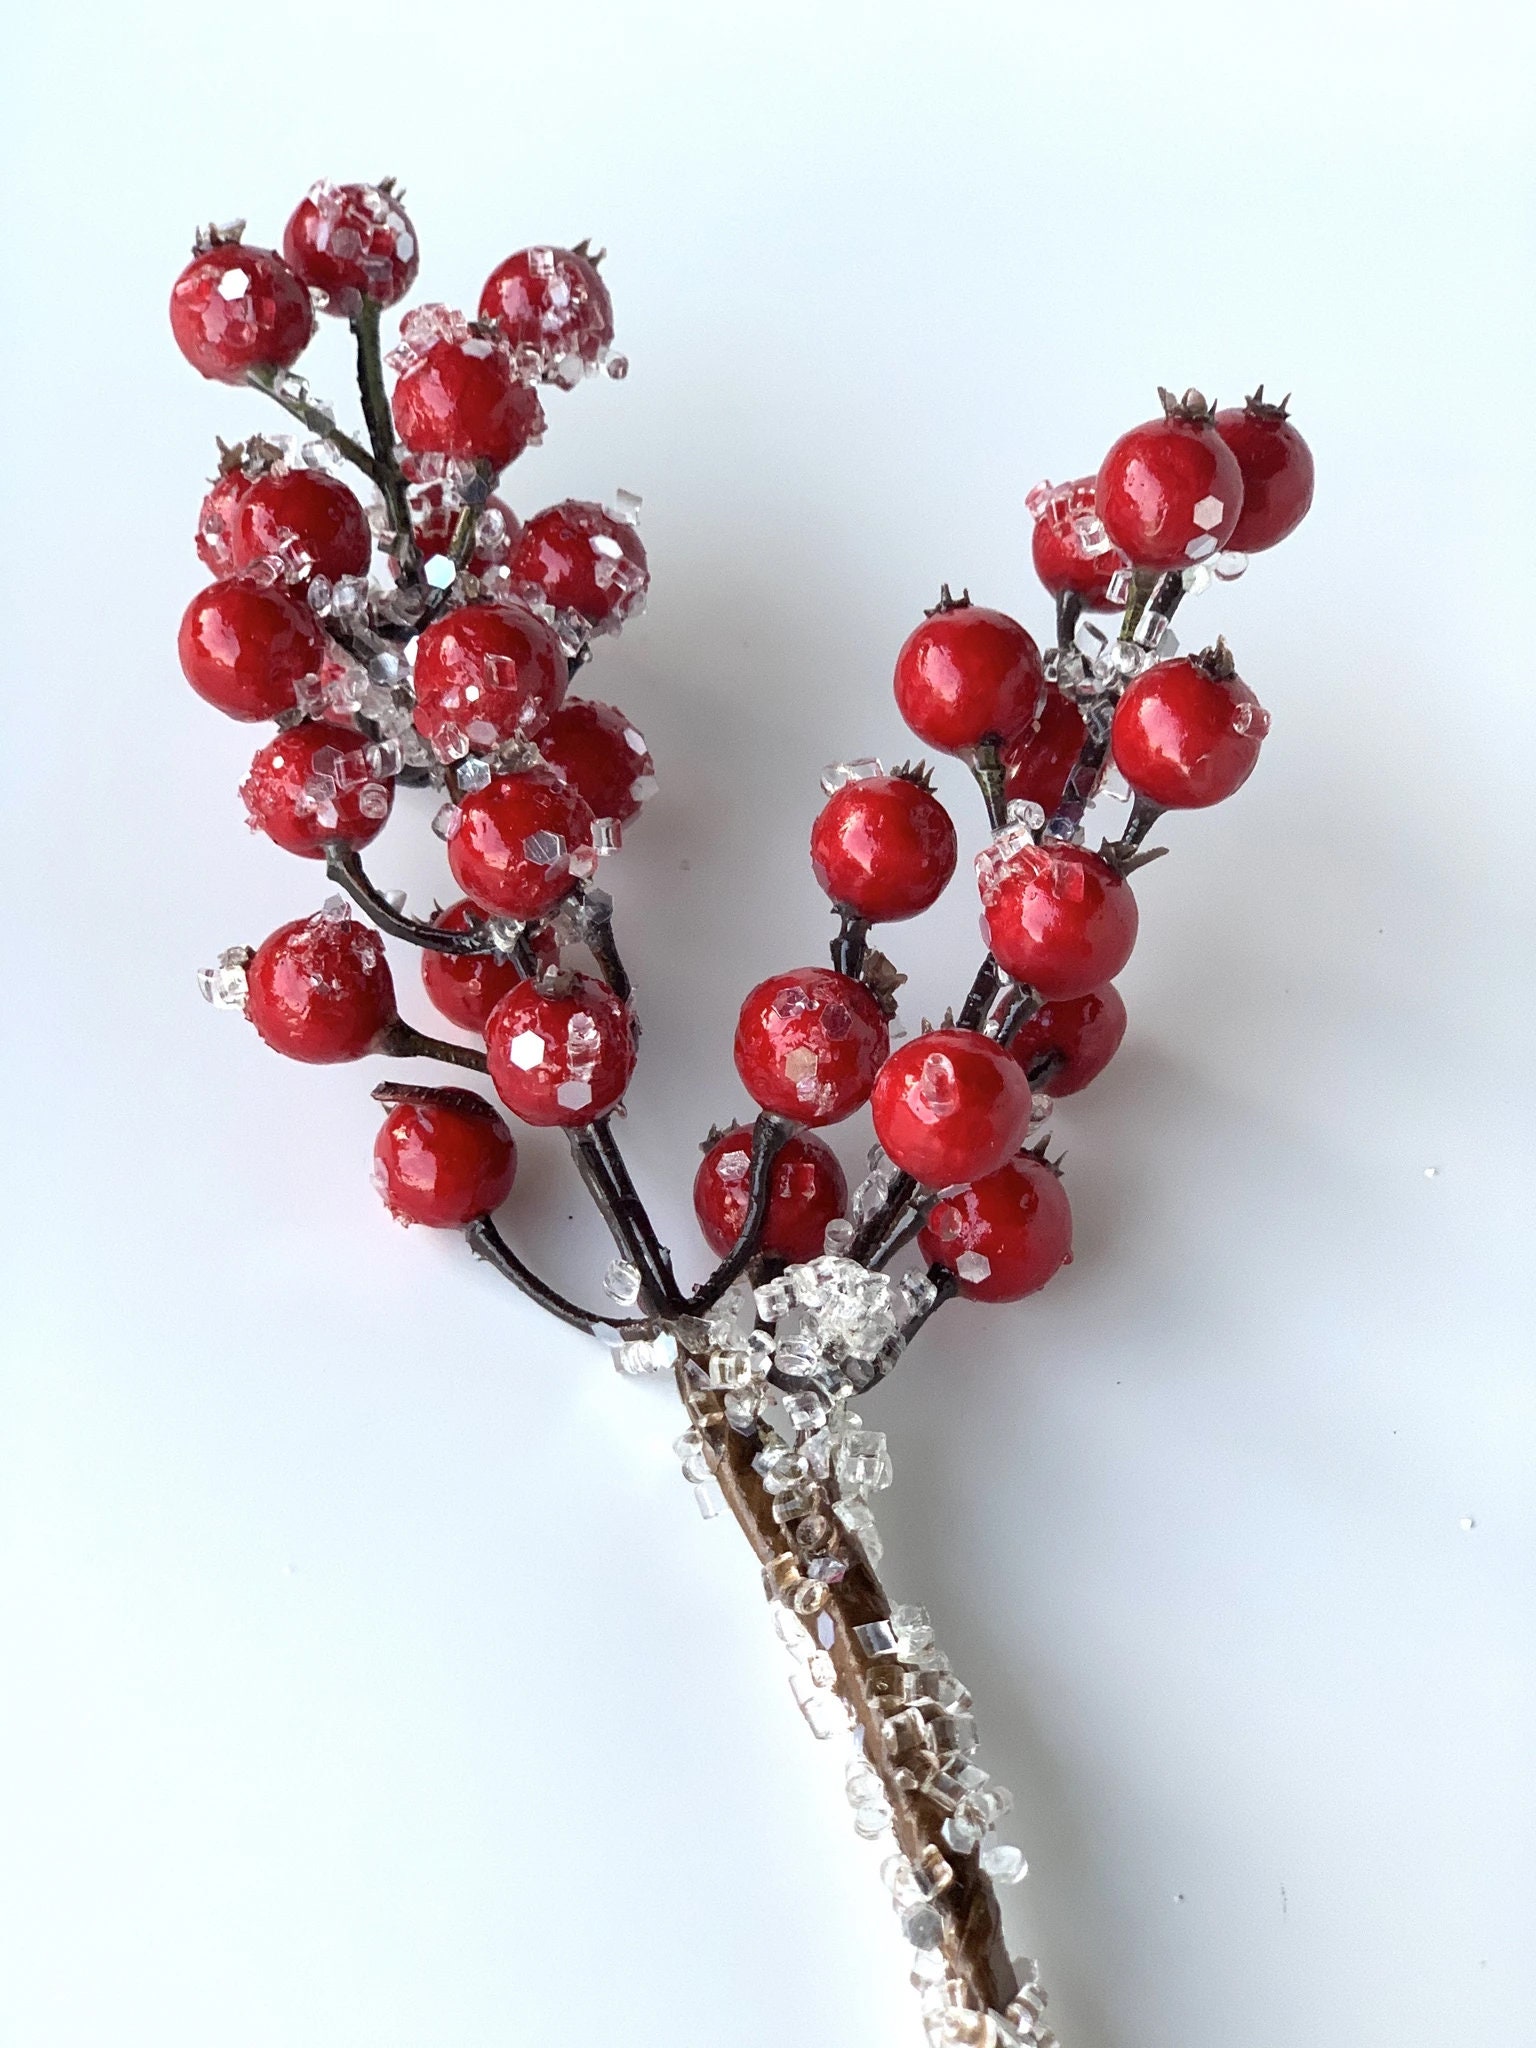 AnyDesign 12 Pack Artificial White Berry Picks Christmas Frosted Berry  Stems Snow Tipped Berry Branches Christmas Wreath Decor for Xmas Tree DIY